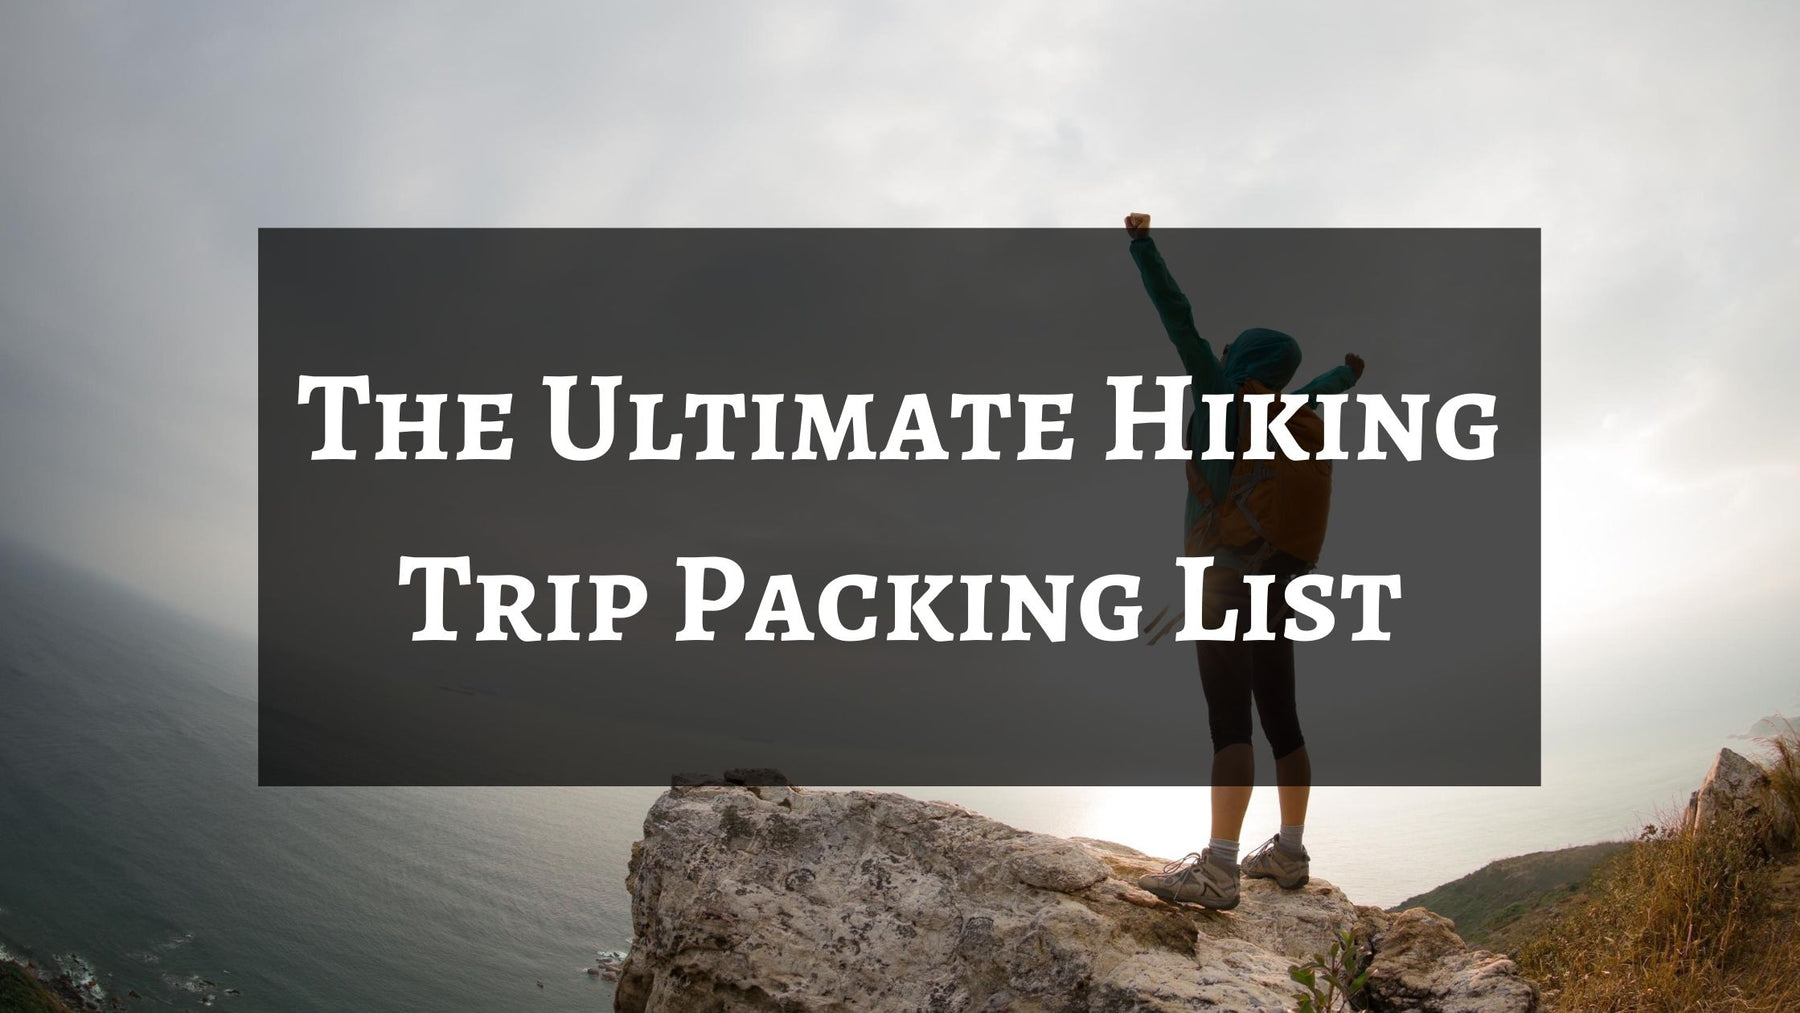 The Ultimate Hiking Trip Packing List